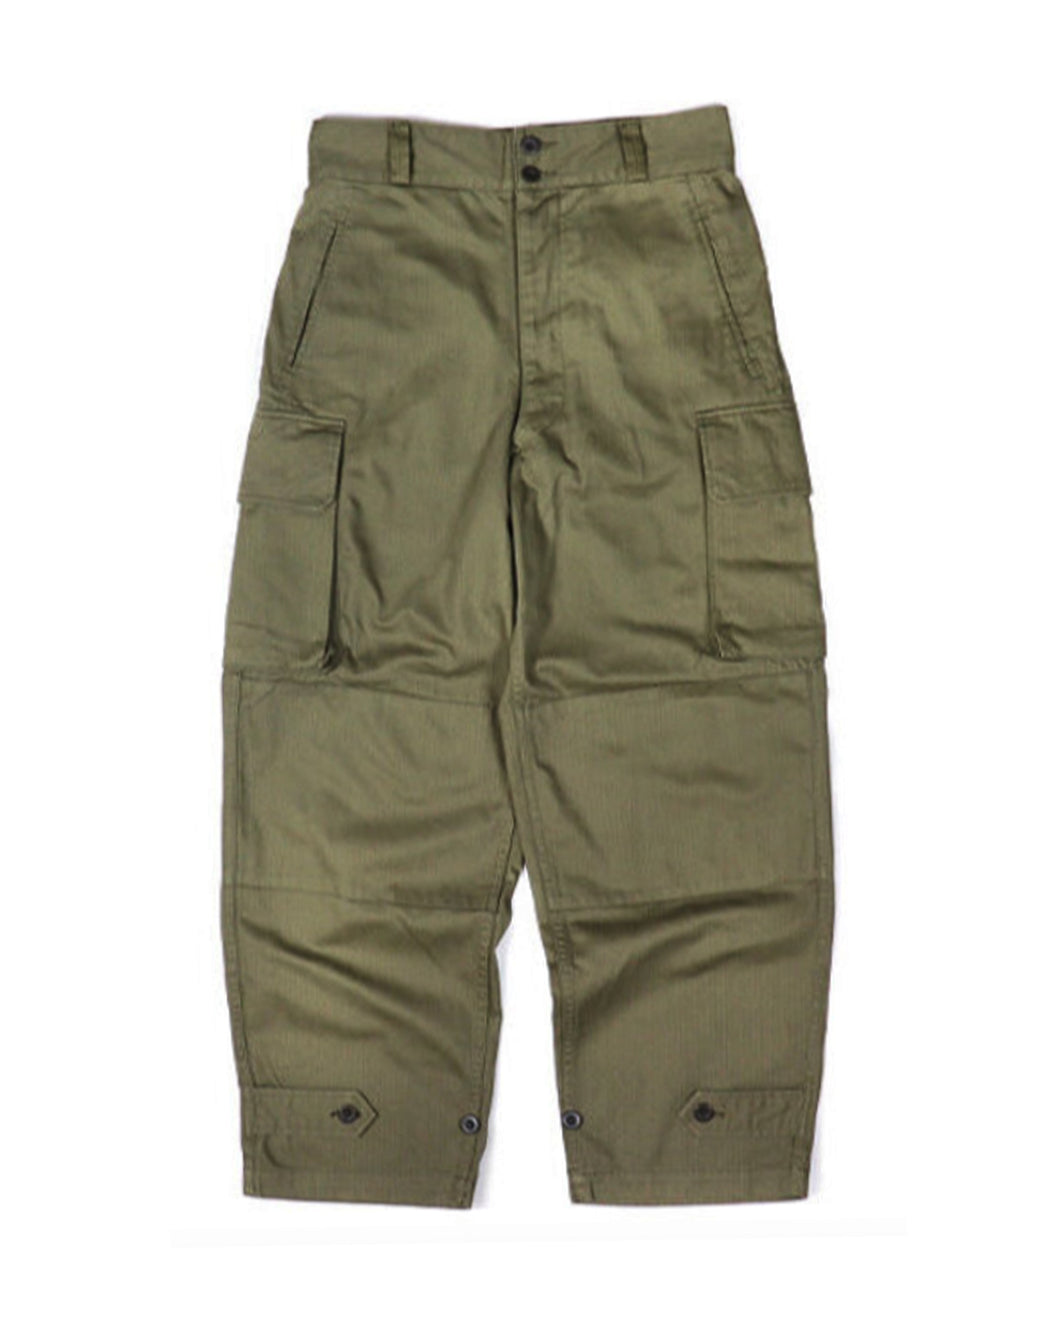 FRENCH M47 FIELD MILITARY PANTS -OLIVE